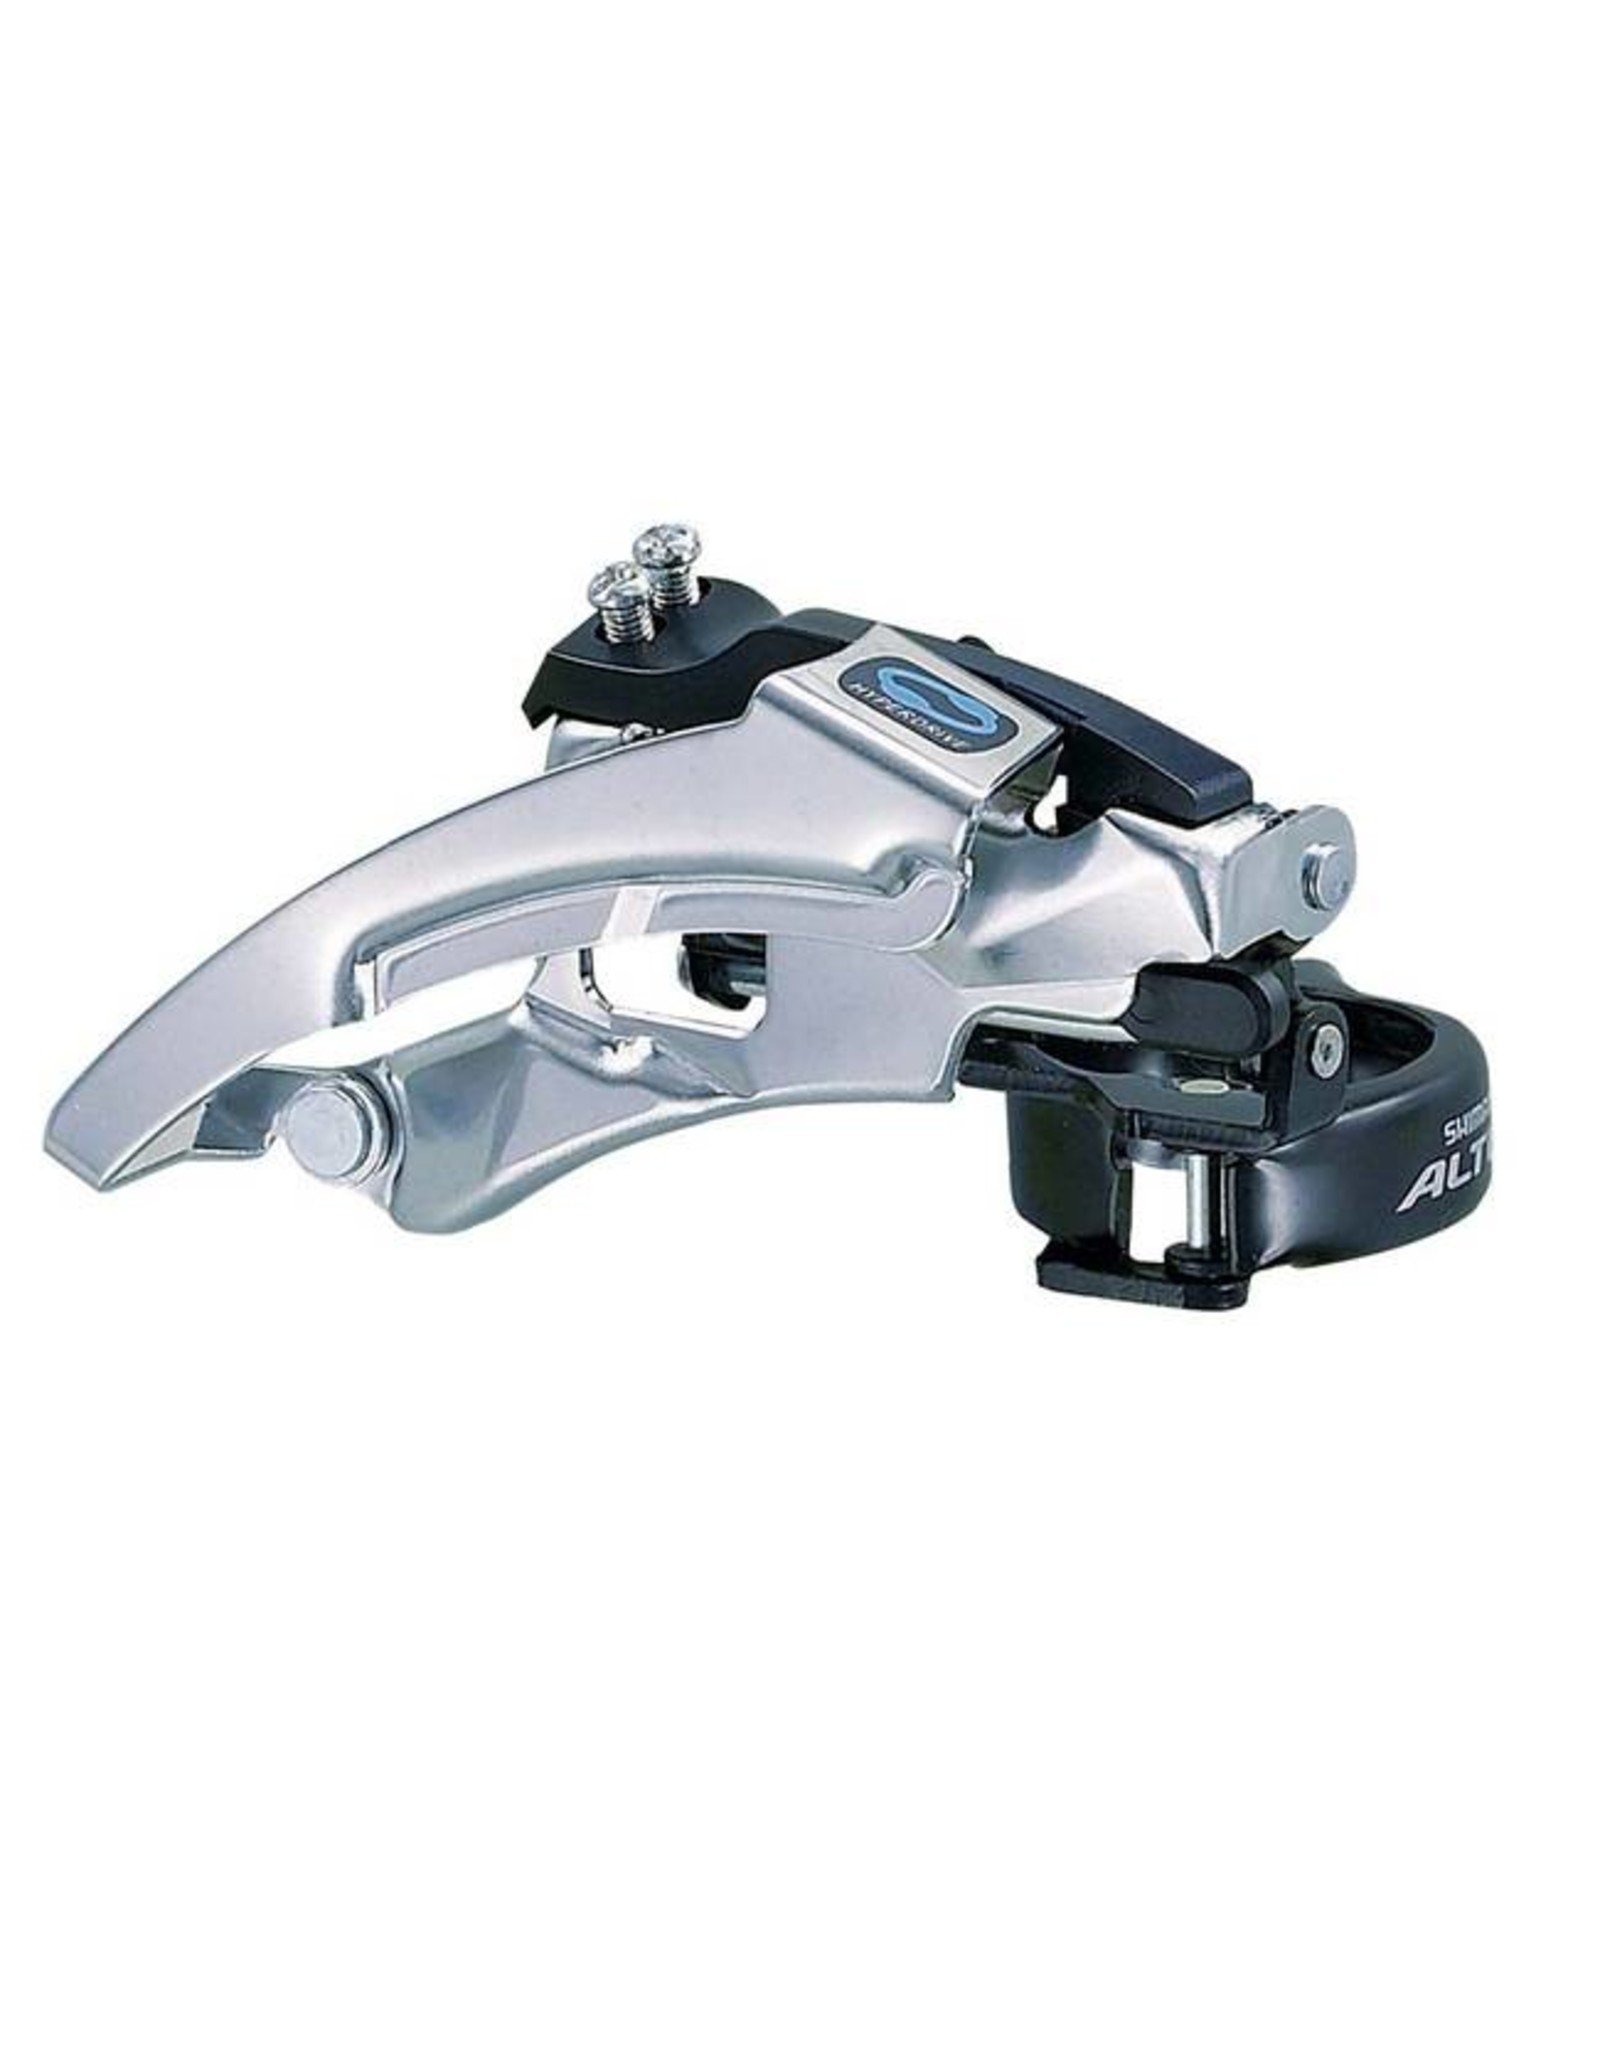 SHIMANO Shimano Altus Front Derailleur FD-M310, Top-Swing Dual-Pull Band-Type, 63-66 degree mount angle